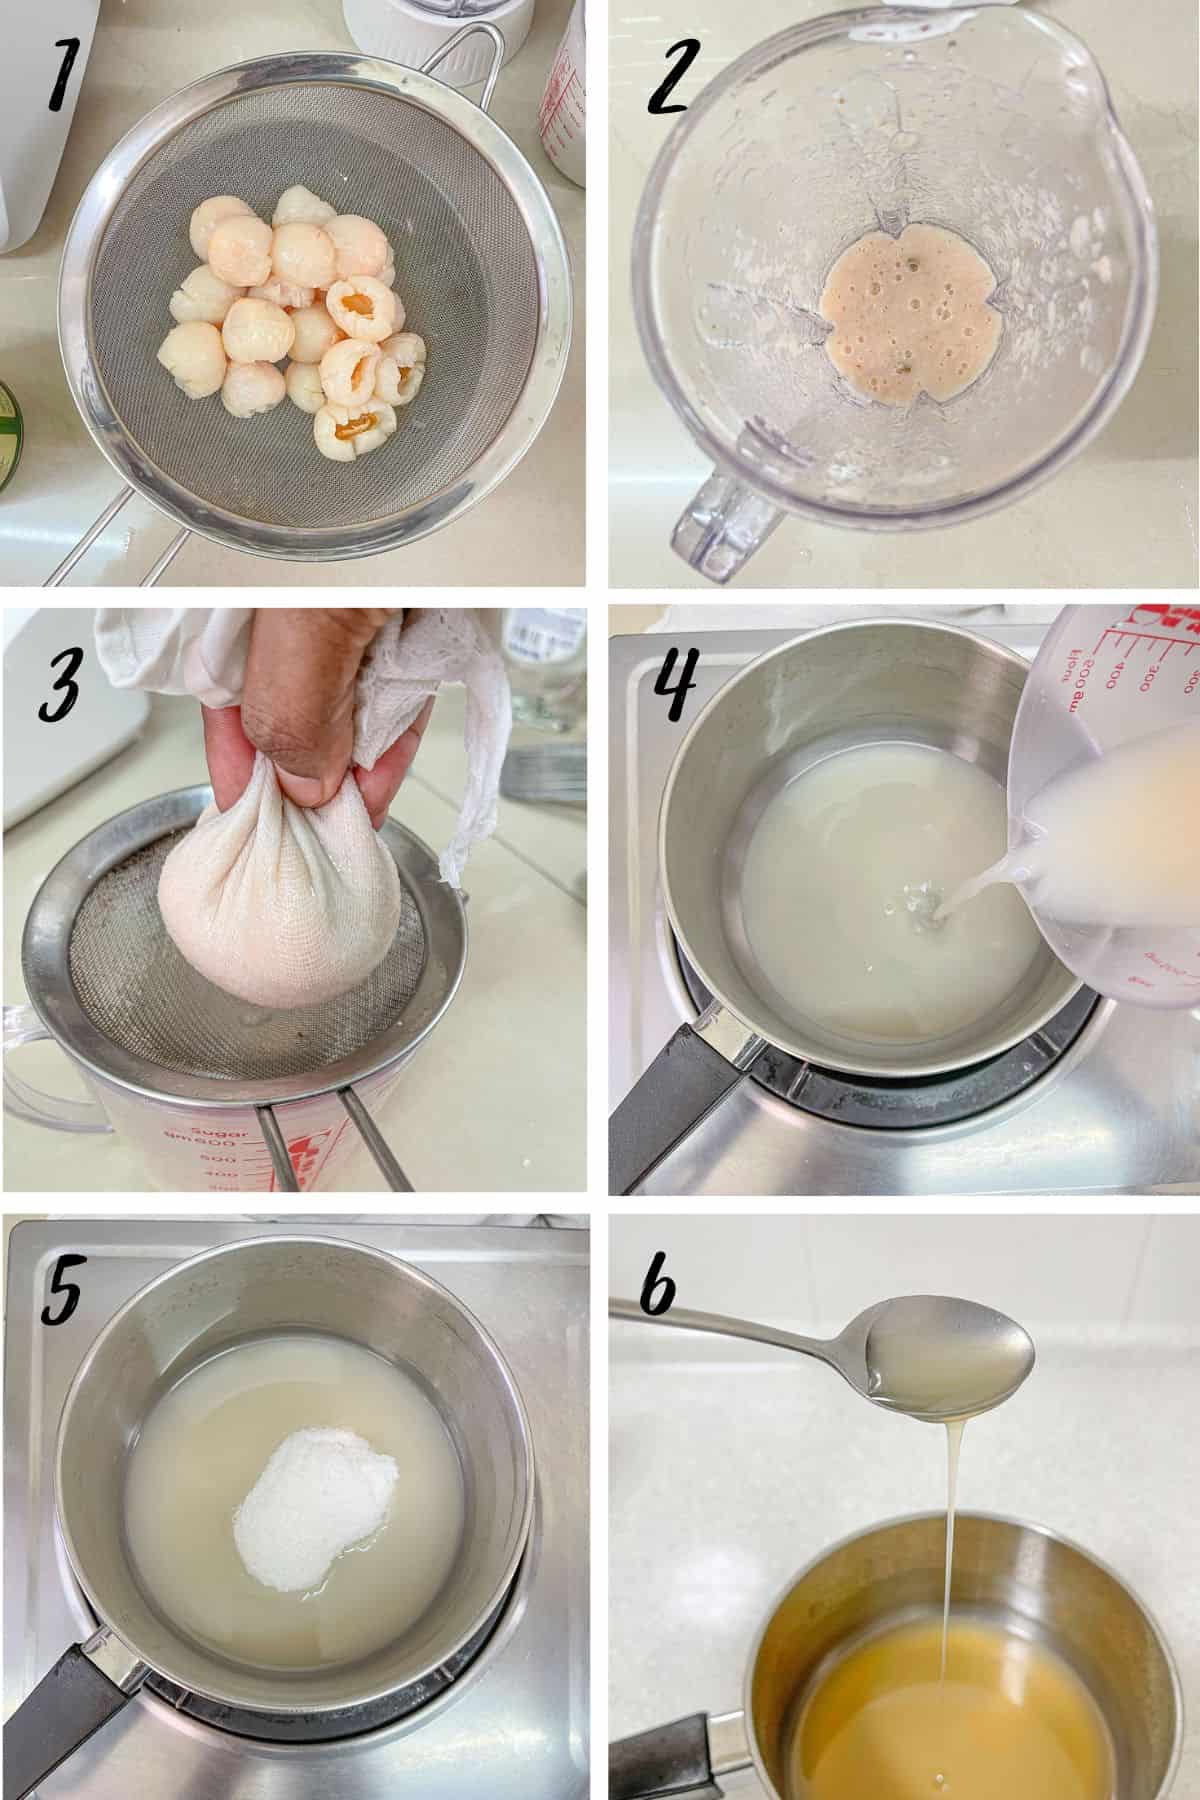 A poster of 6 images showing how to make lychee syrup from lychee juice.